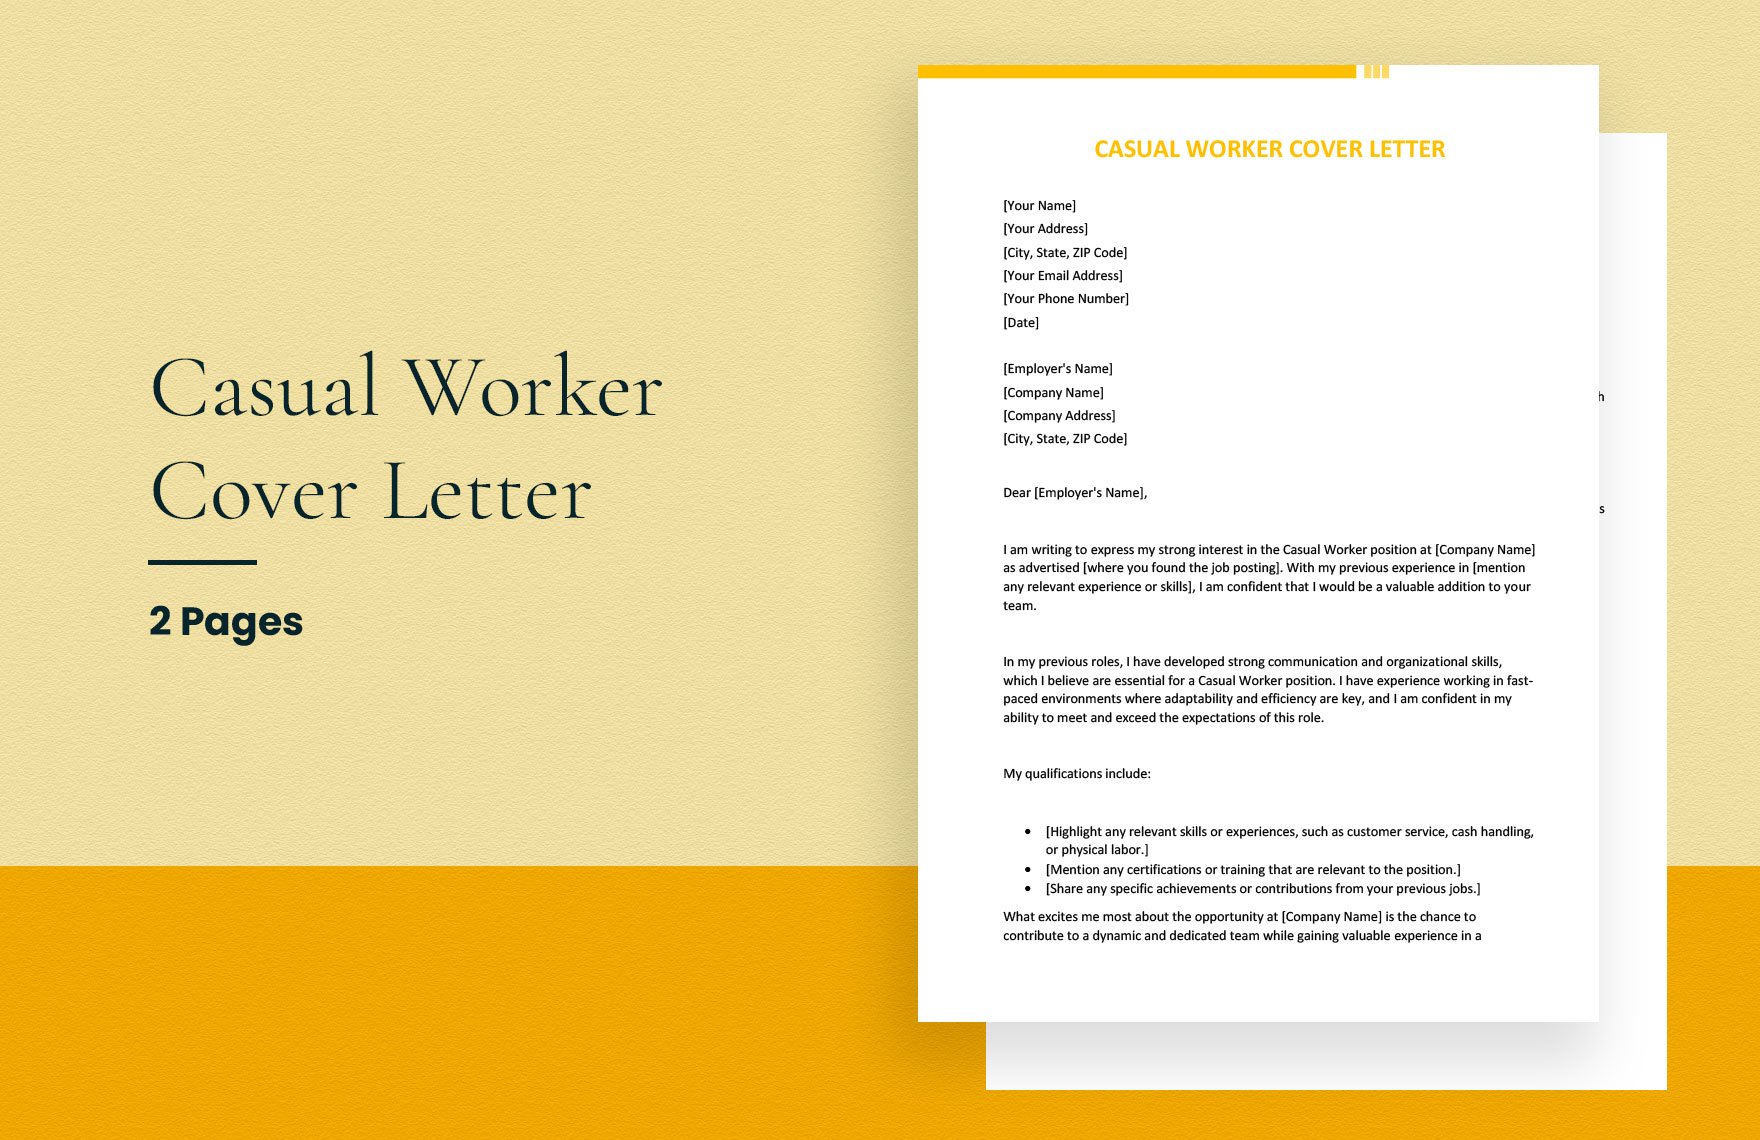 Casual Worker Cover Letter in Word, Google Docs